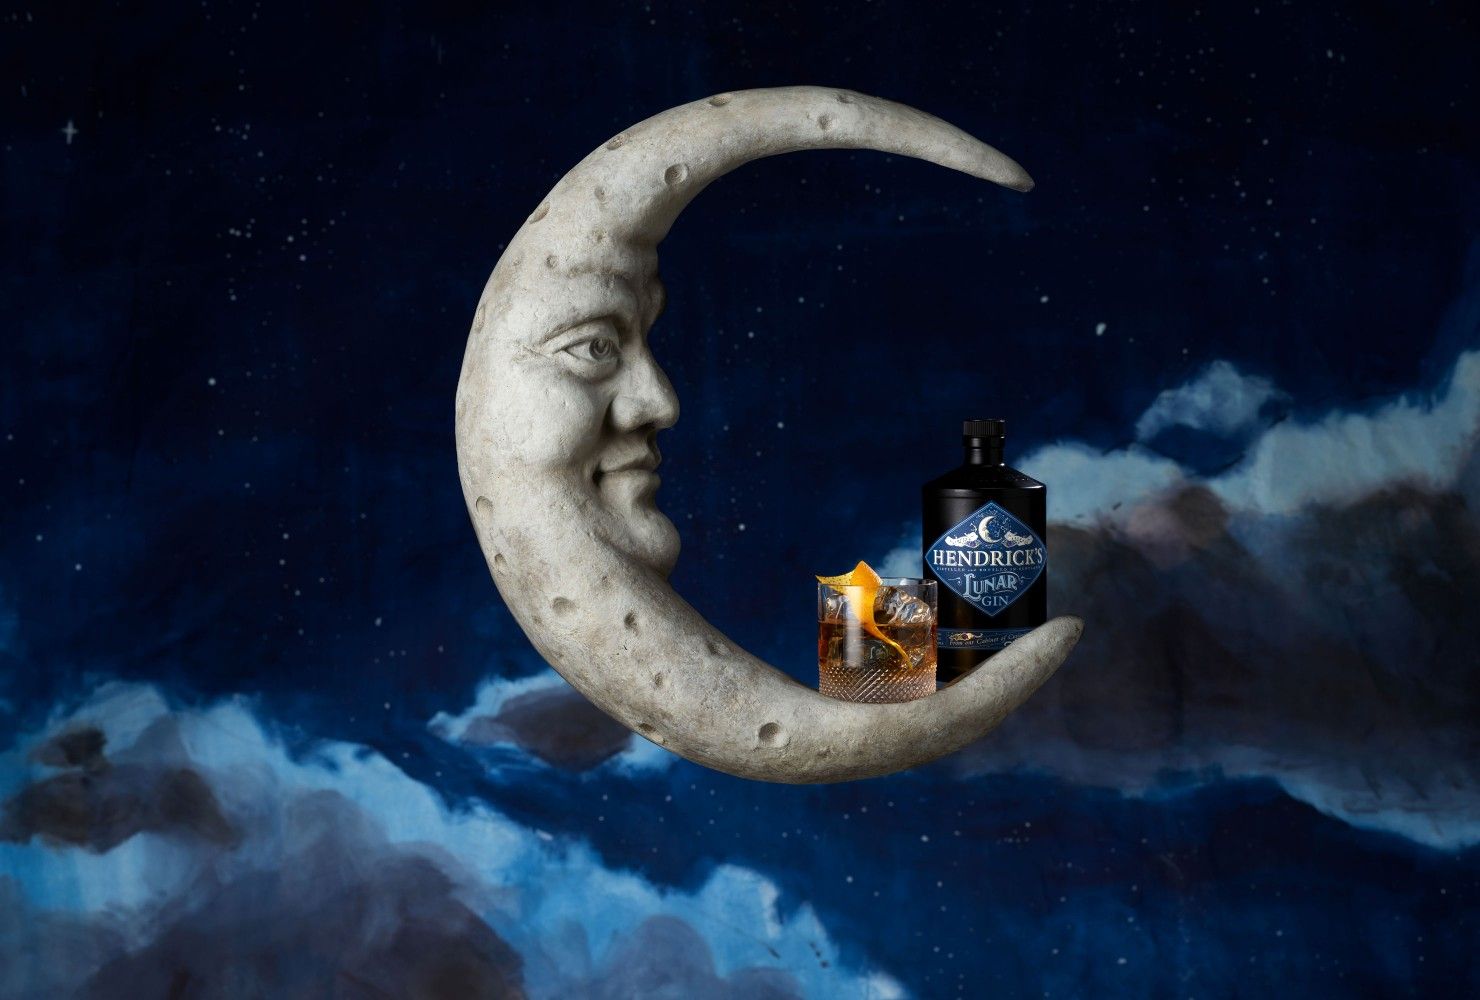 Hendrick's Lunar Gin

Starry Old Fashioned